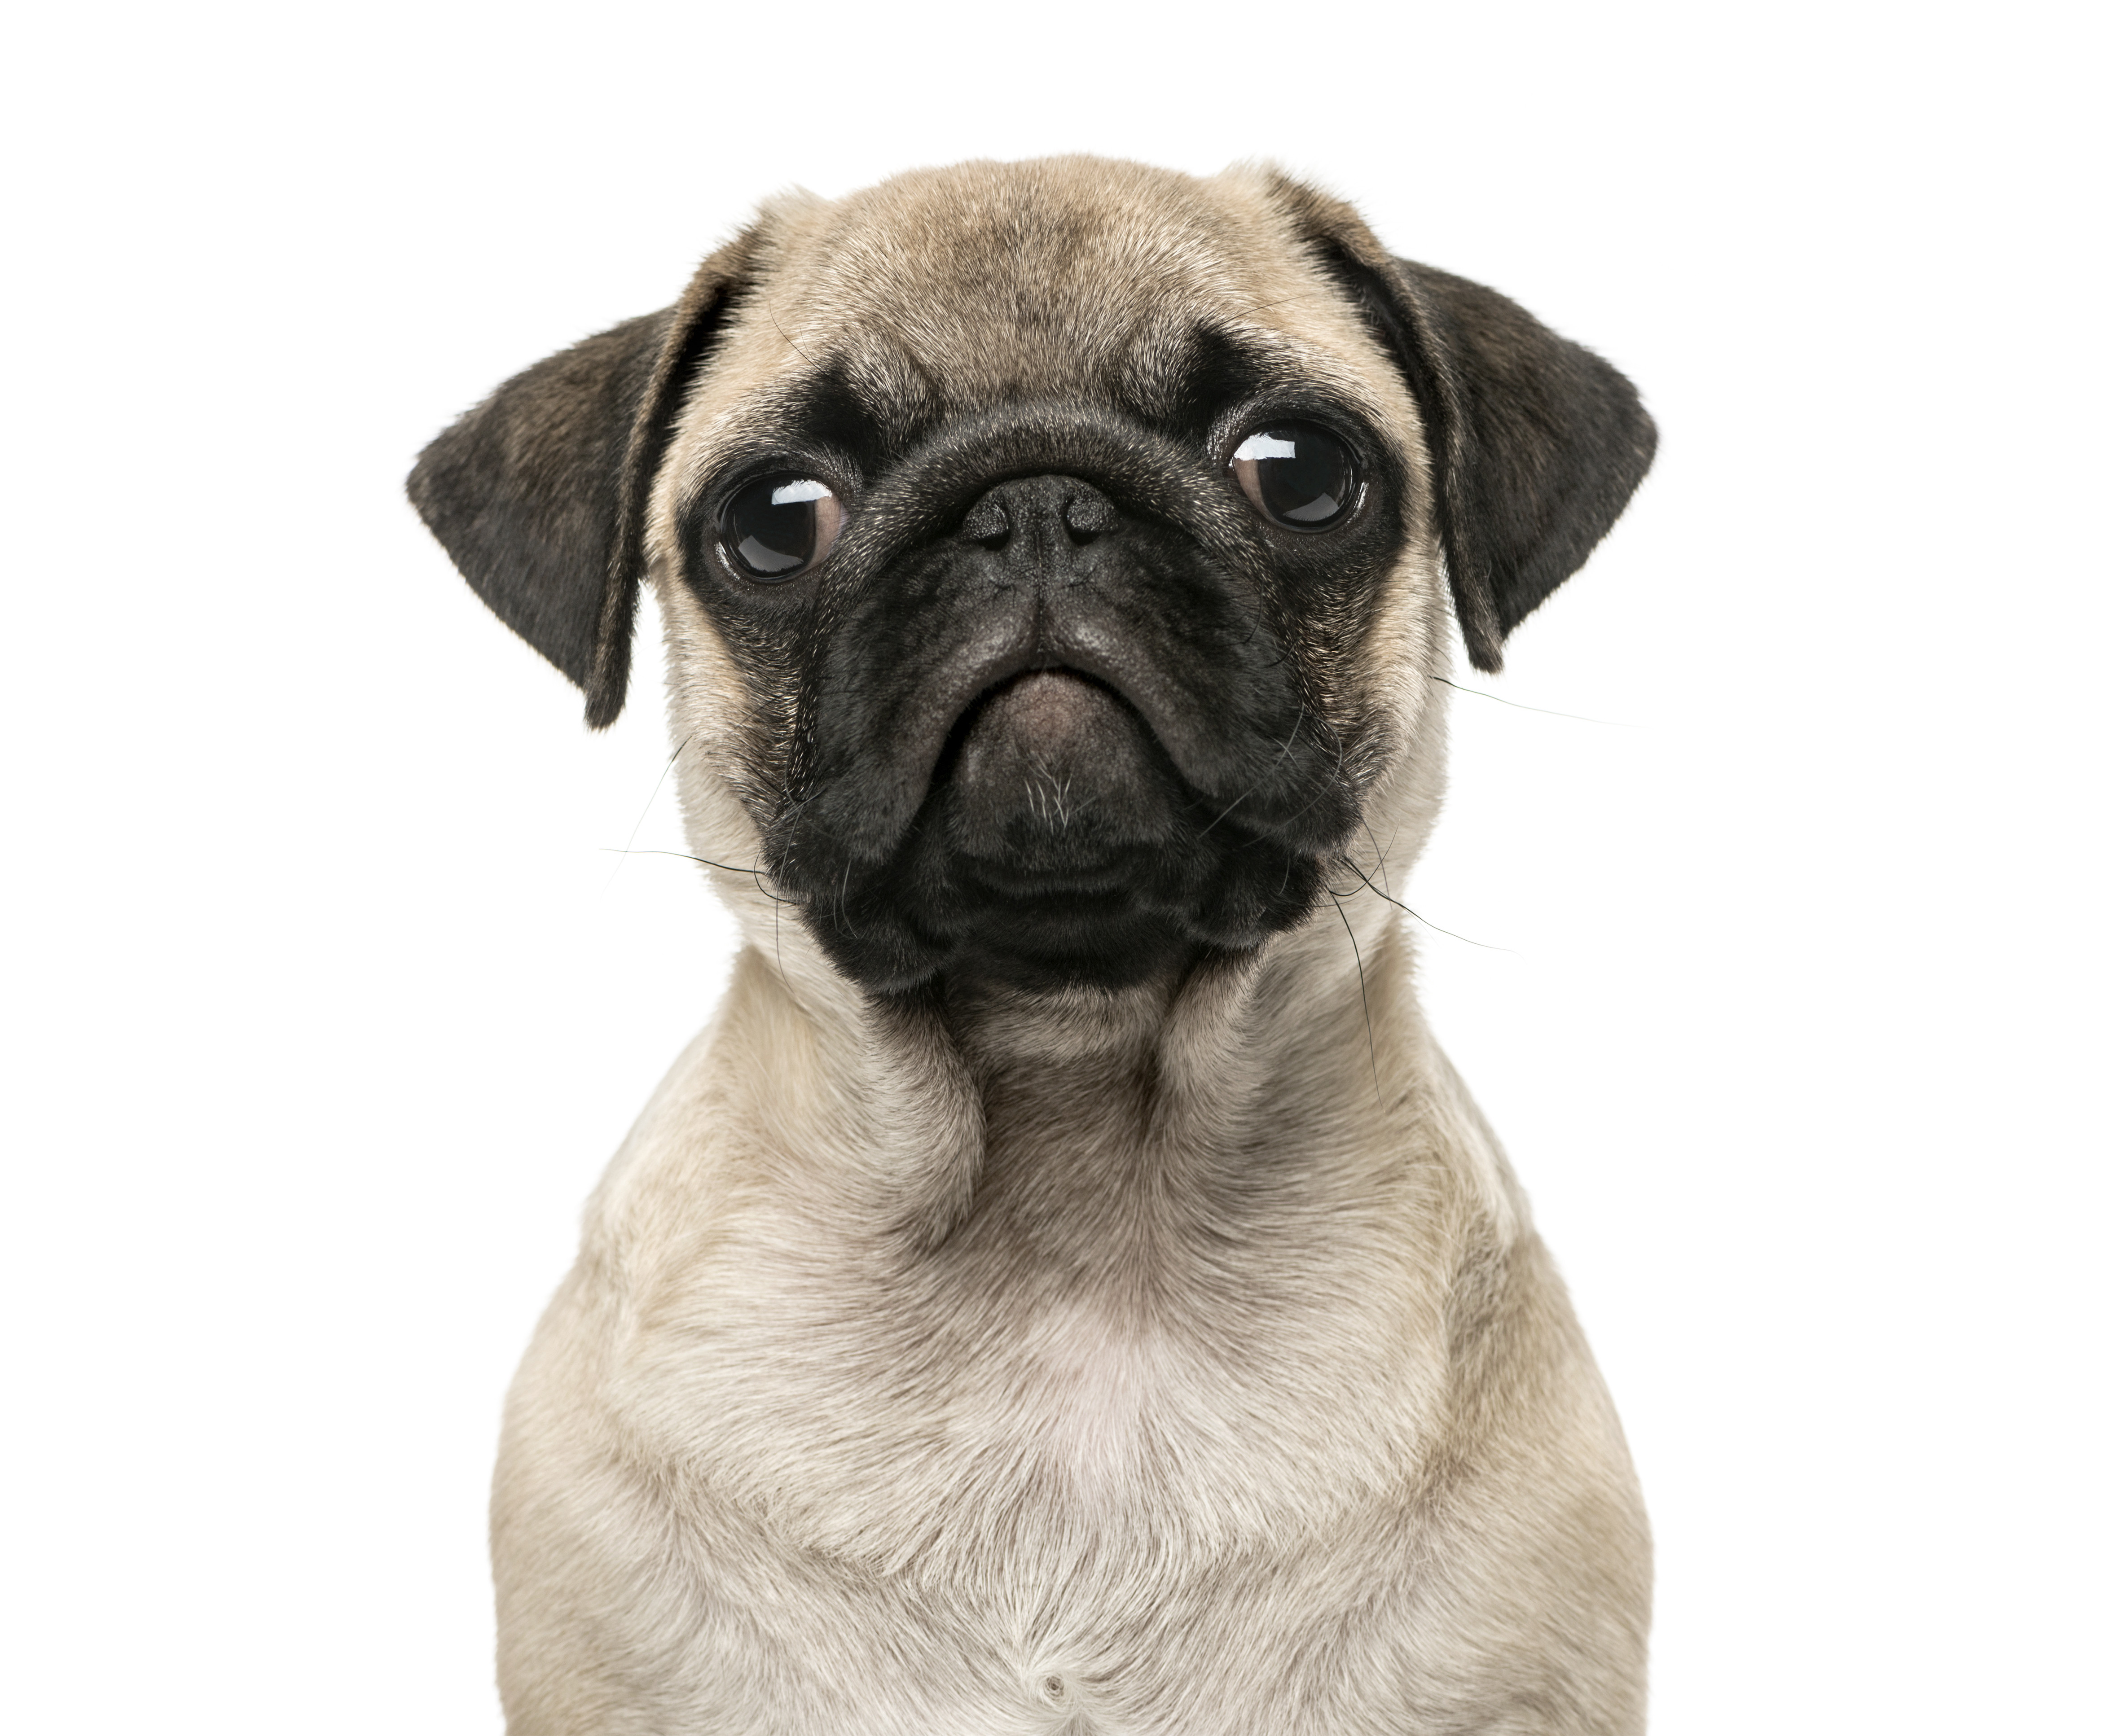 Close-up of a Pug puppy, 3 months old, isolated on white (Eric Isselee&mdash;Getty Images/Biosphoto)